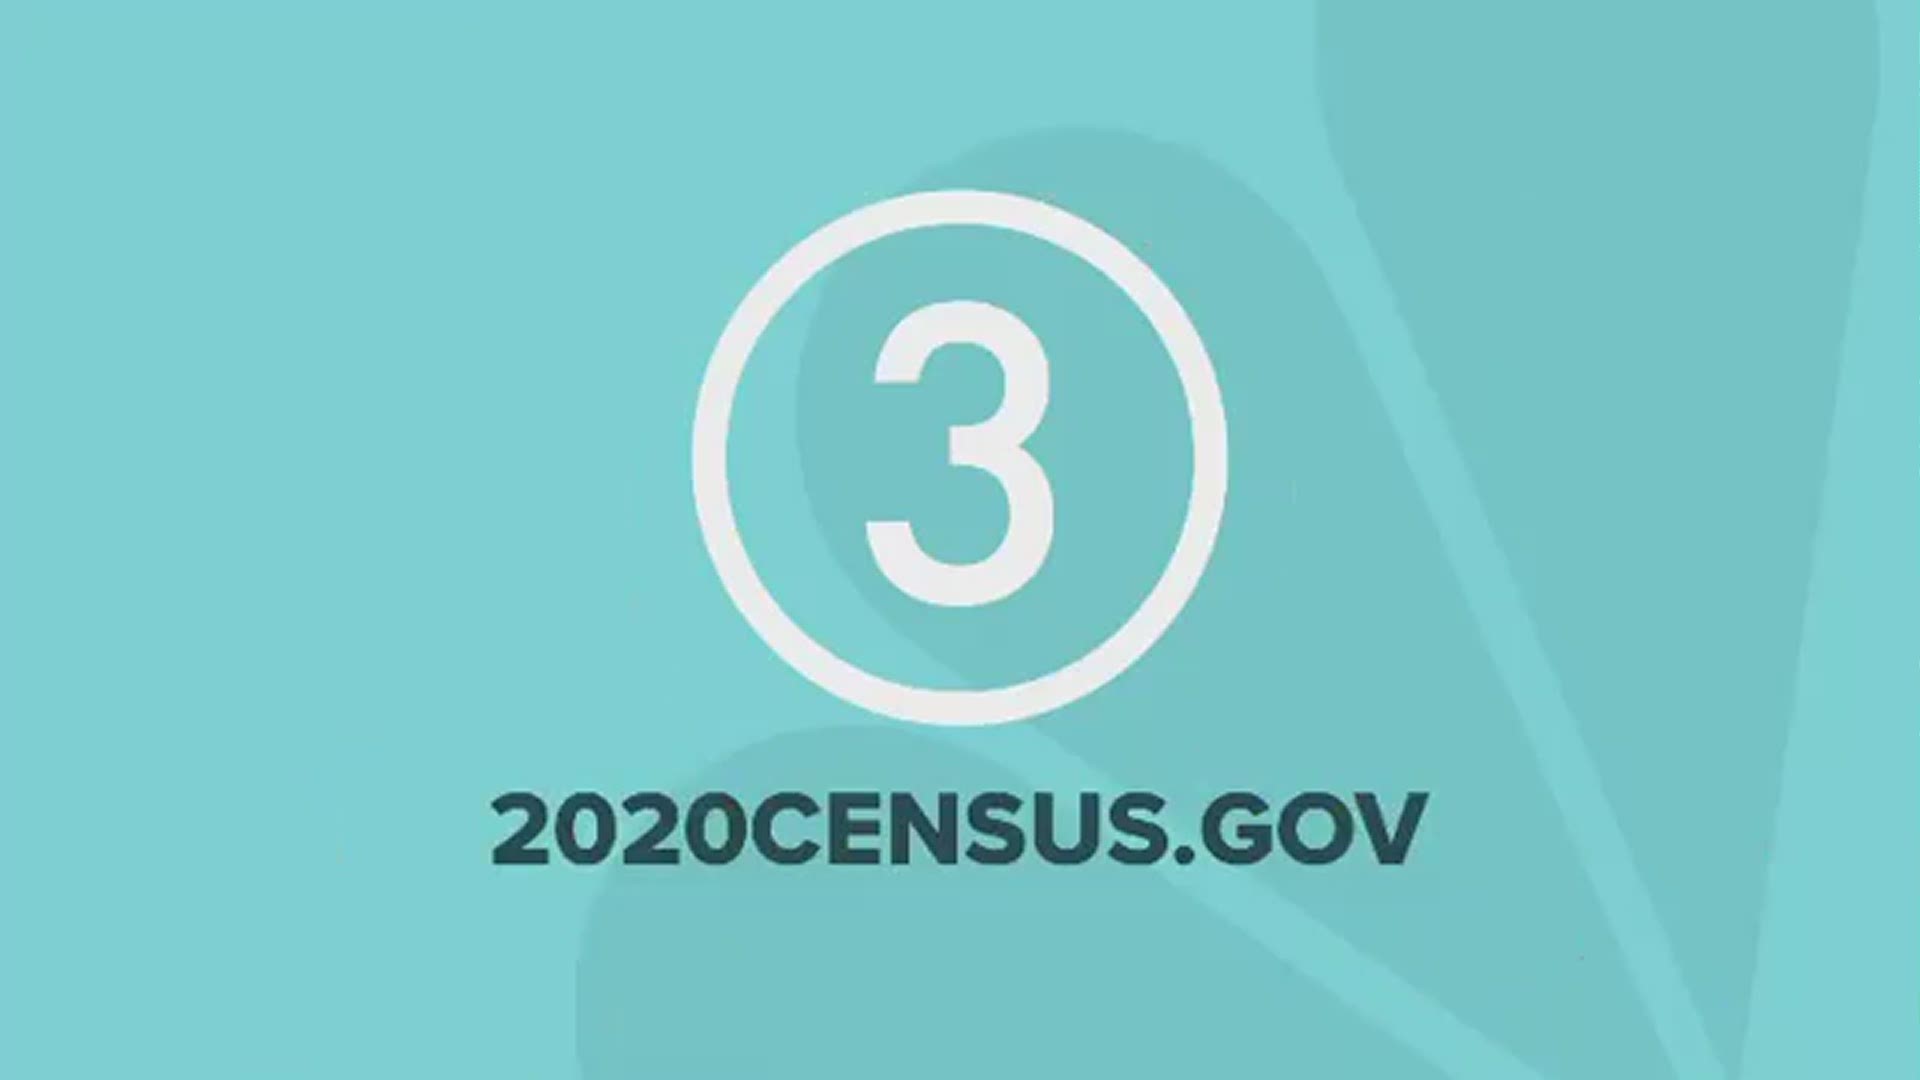 The 2020 census has never been easier to fill out, but still many haven't done it. If all of us aren't counted, Ohio could really lose out. #CuyahogaCounts